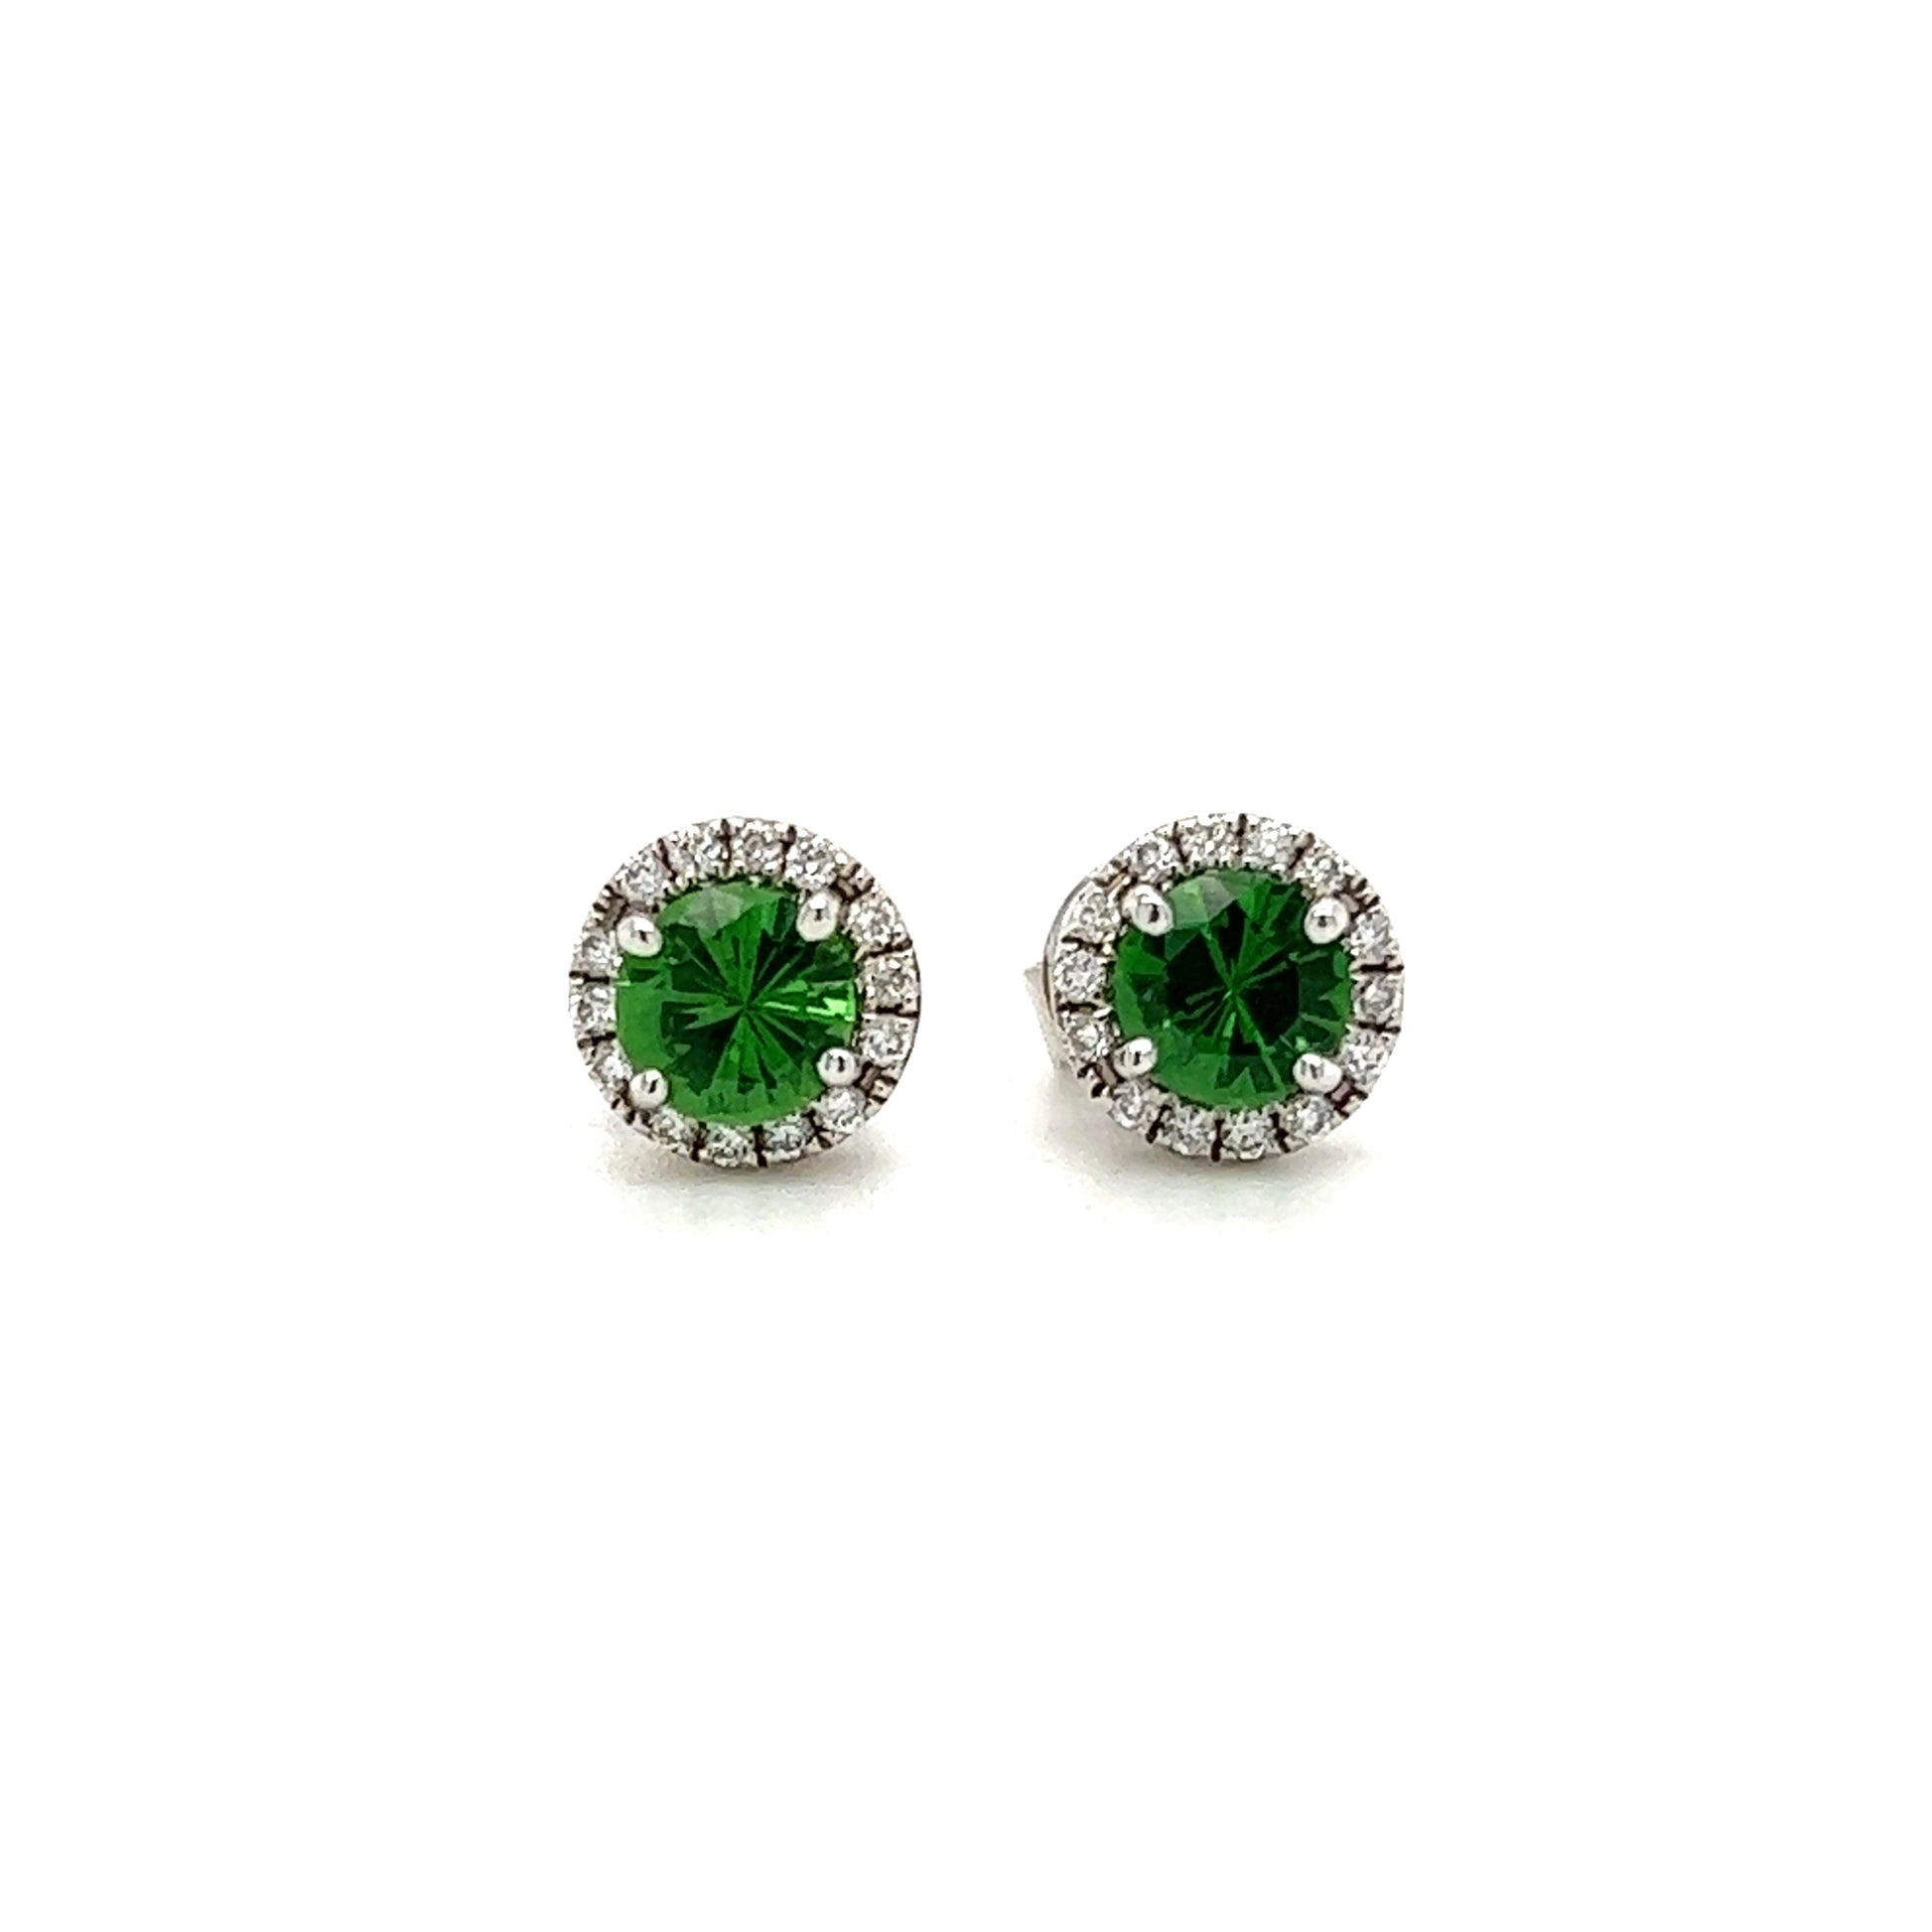 Round Tsavorite Stud Earrings with Diamonds Halo in 14K White Gold Front View